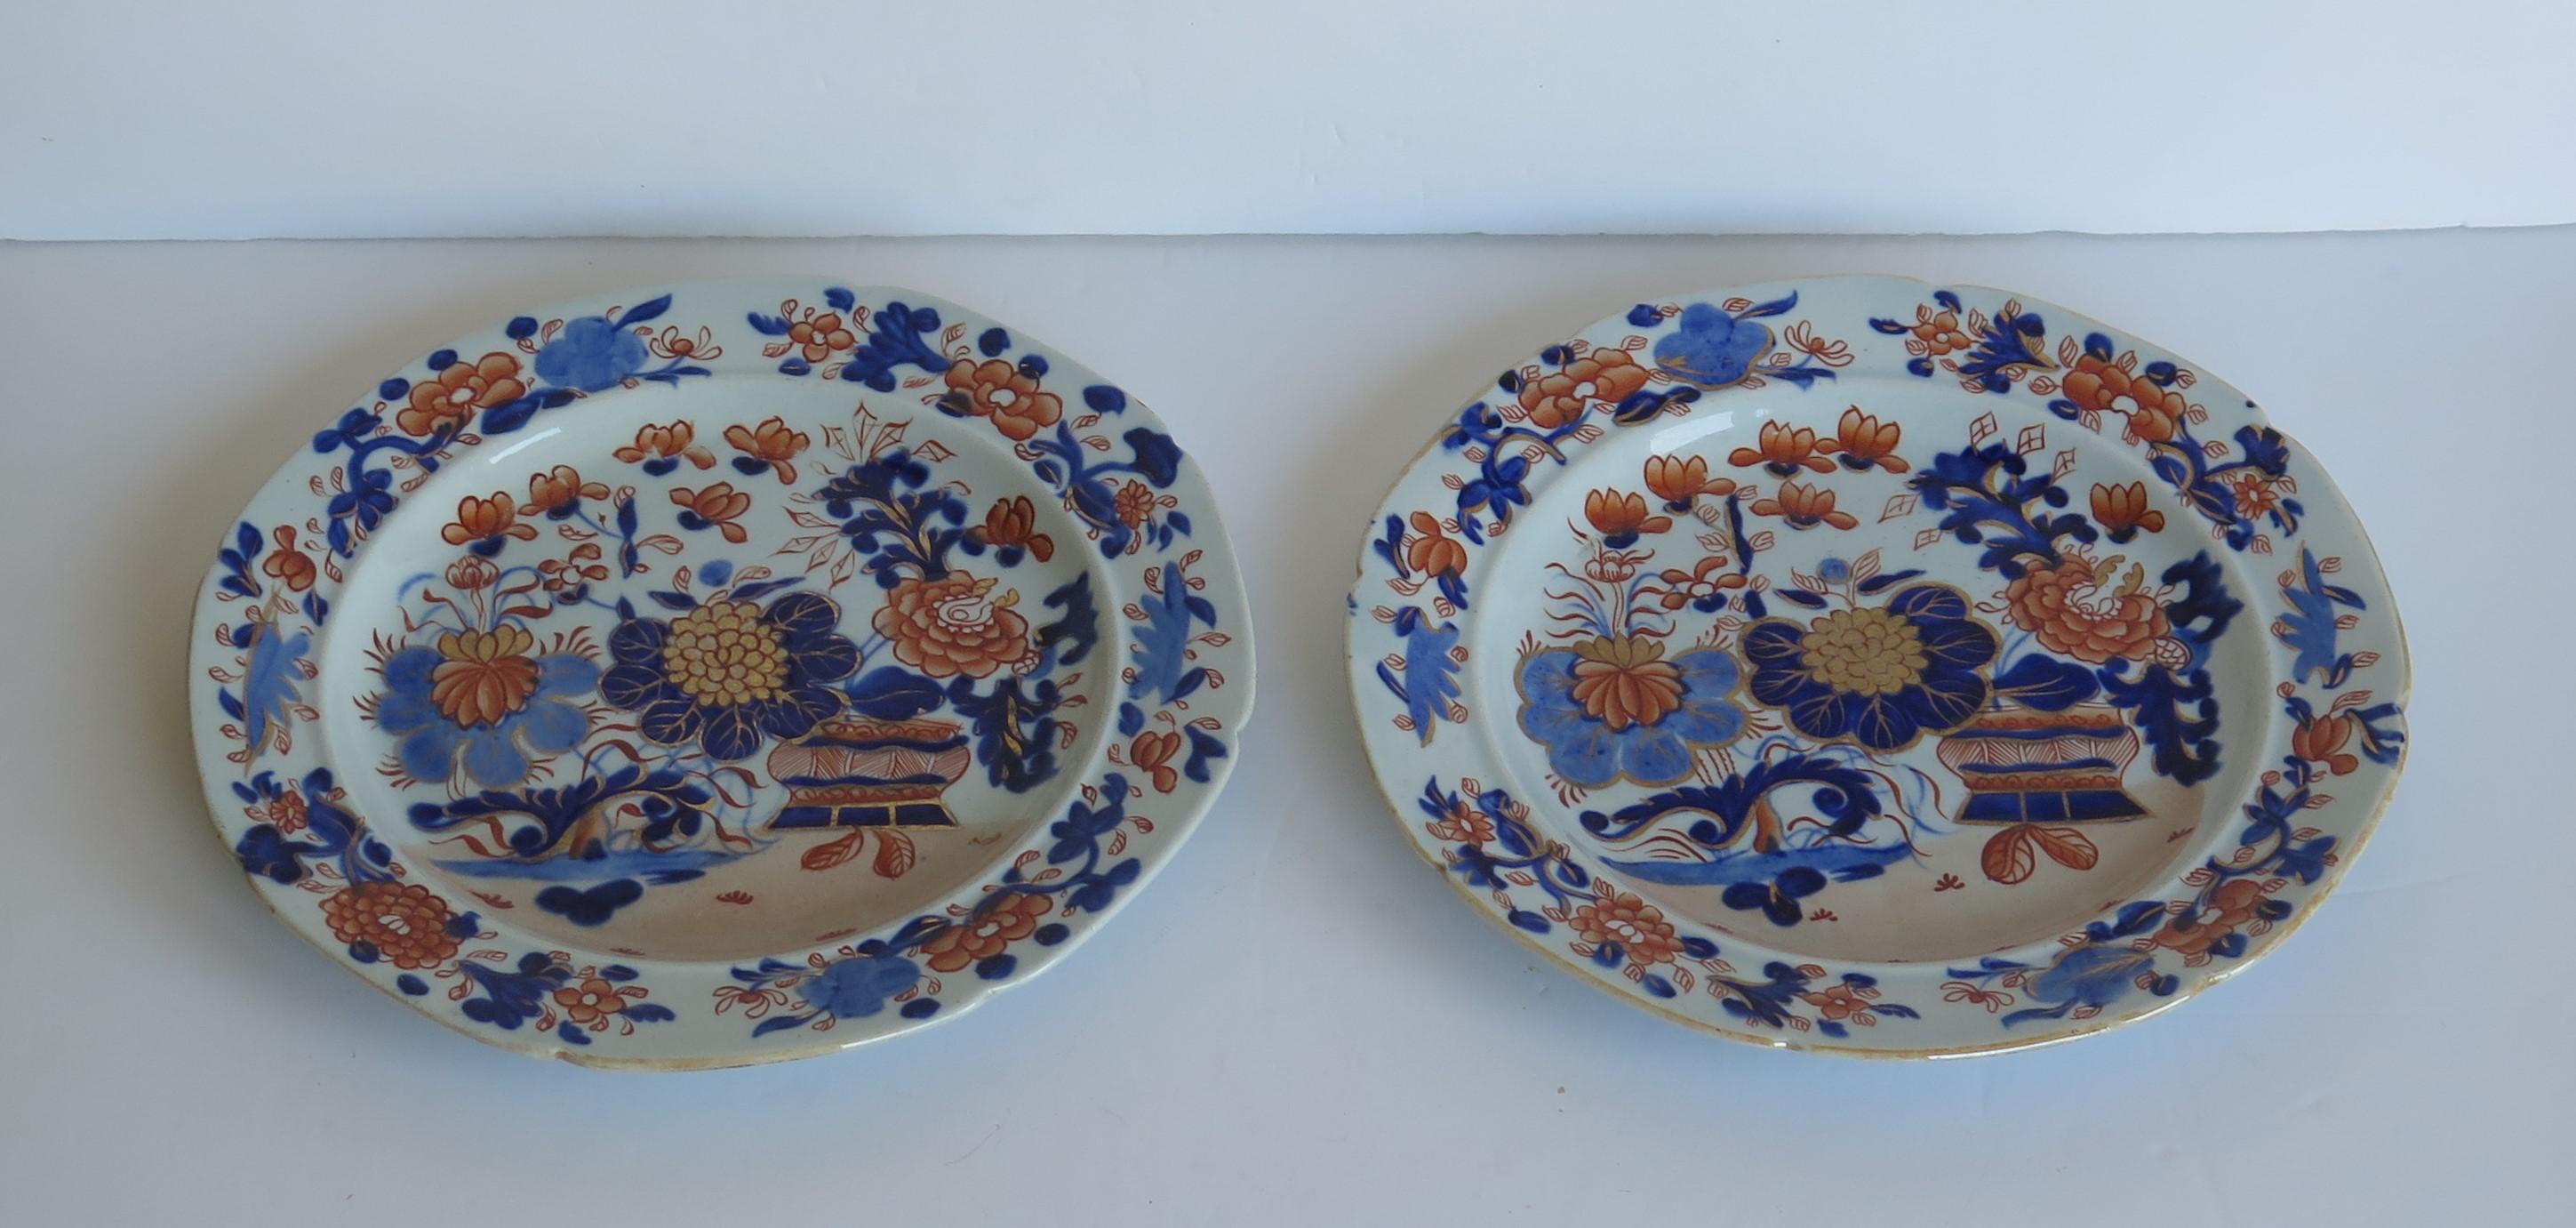 This is a very fine early pair of Mason's Ironstone pottery side plates, hand painted in the very decorative gilded basket Japan pattern, produced by the Mason's factory at Lane Delph, Staffordshire, England, in the George 111rd period, circa